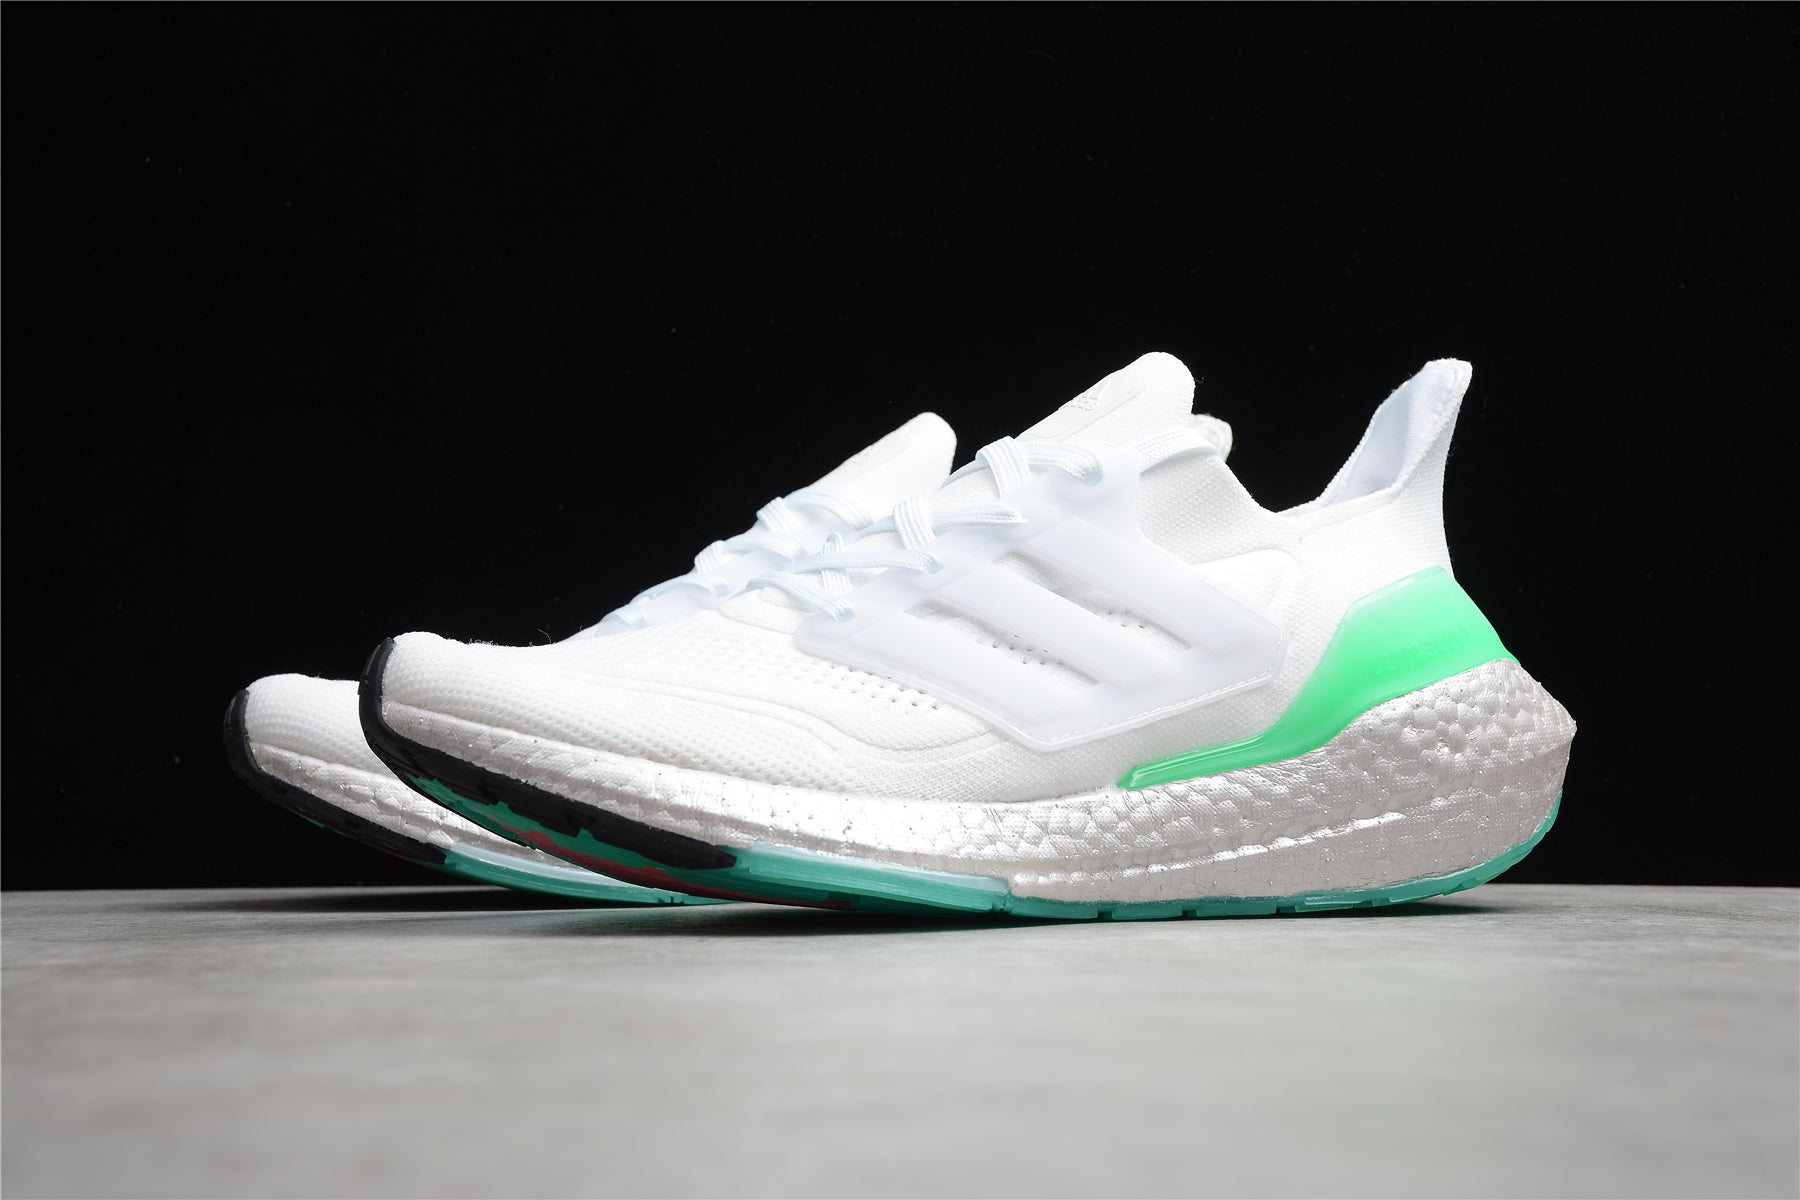 Adidas ultraboost white/green shoes